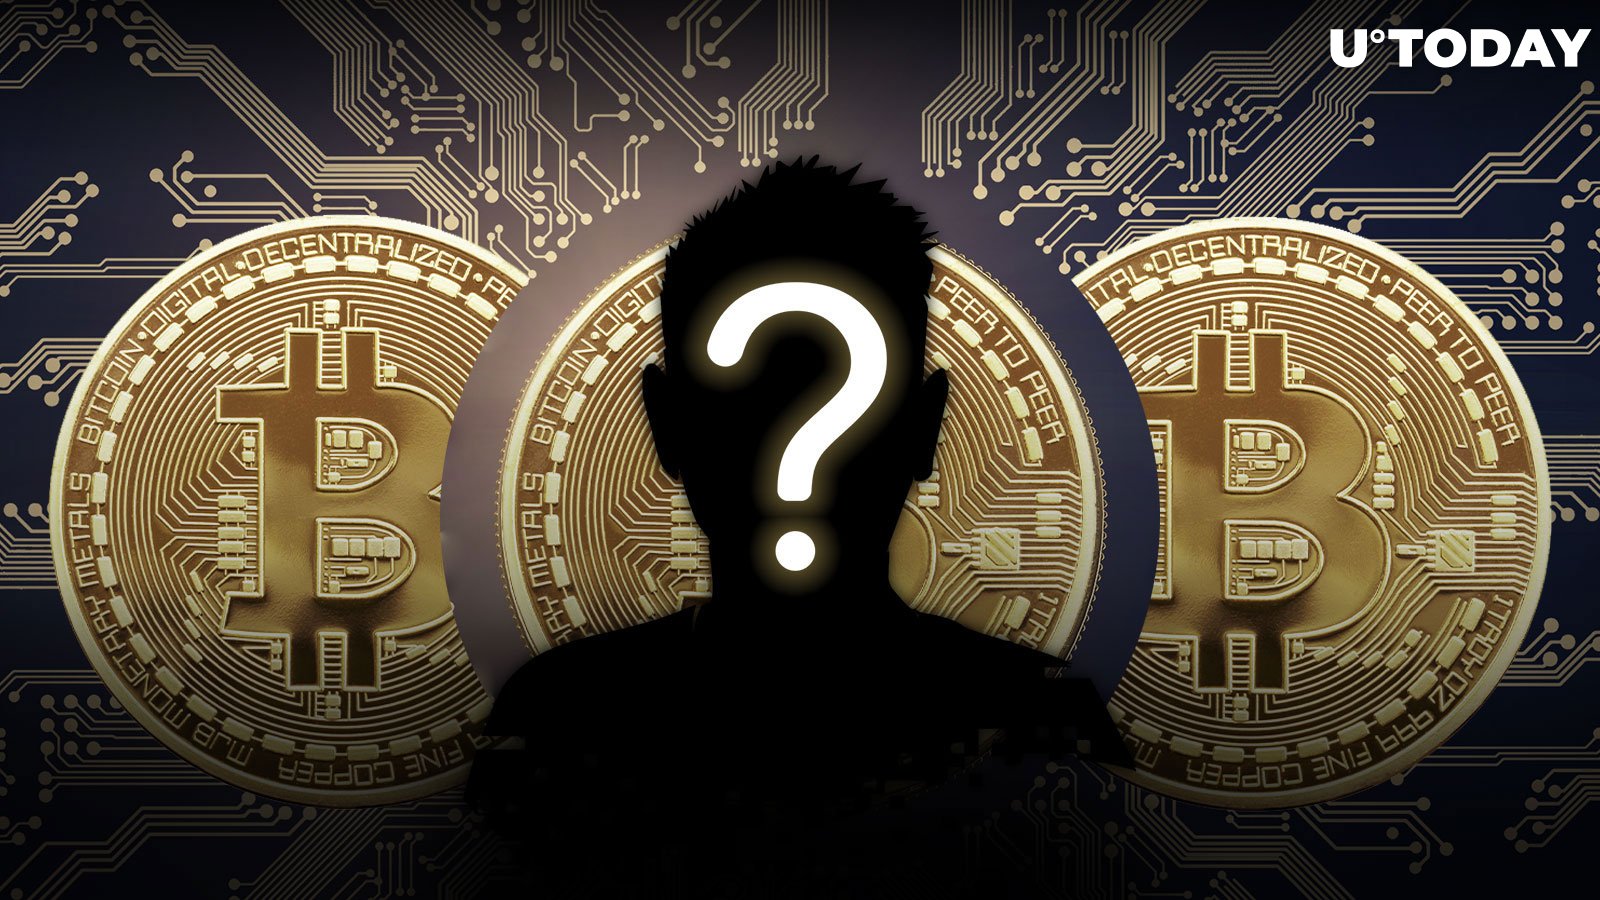 What Bitcoin Creator Satoshi Nakamoto Predicted About Crypto in 2009